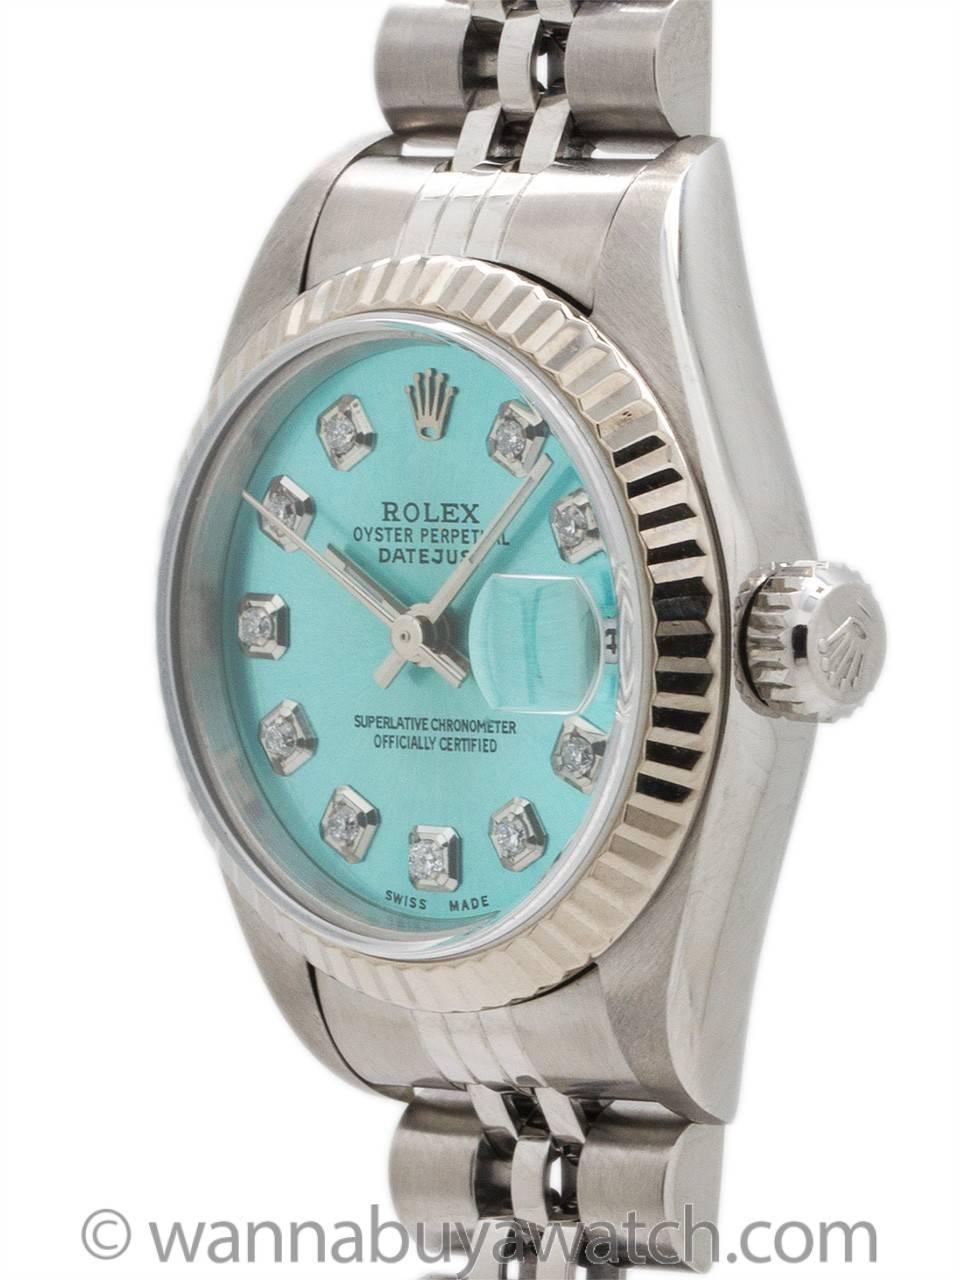 Lady Rolex Stainless Steel Datejust ref 79174 serial# A2 circa 1998. Featuring a 27mm diameter case with white gold fluted bezel, and sapphire crystal. With very popular custom colored “Ice Blue” dial with applied diamond indexes & silver baton